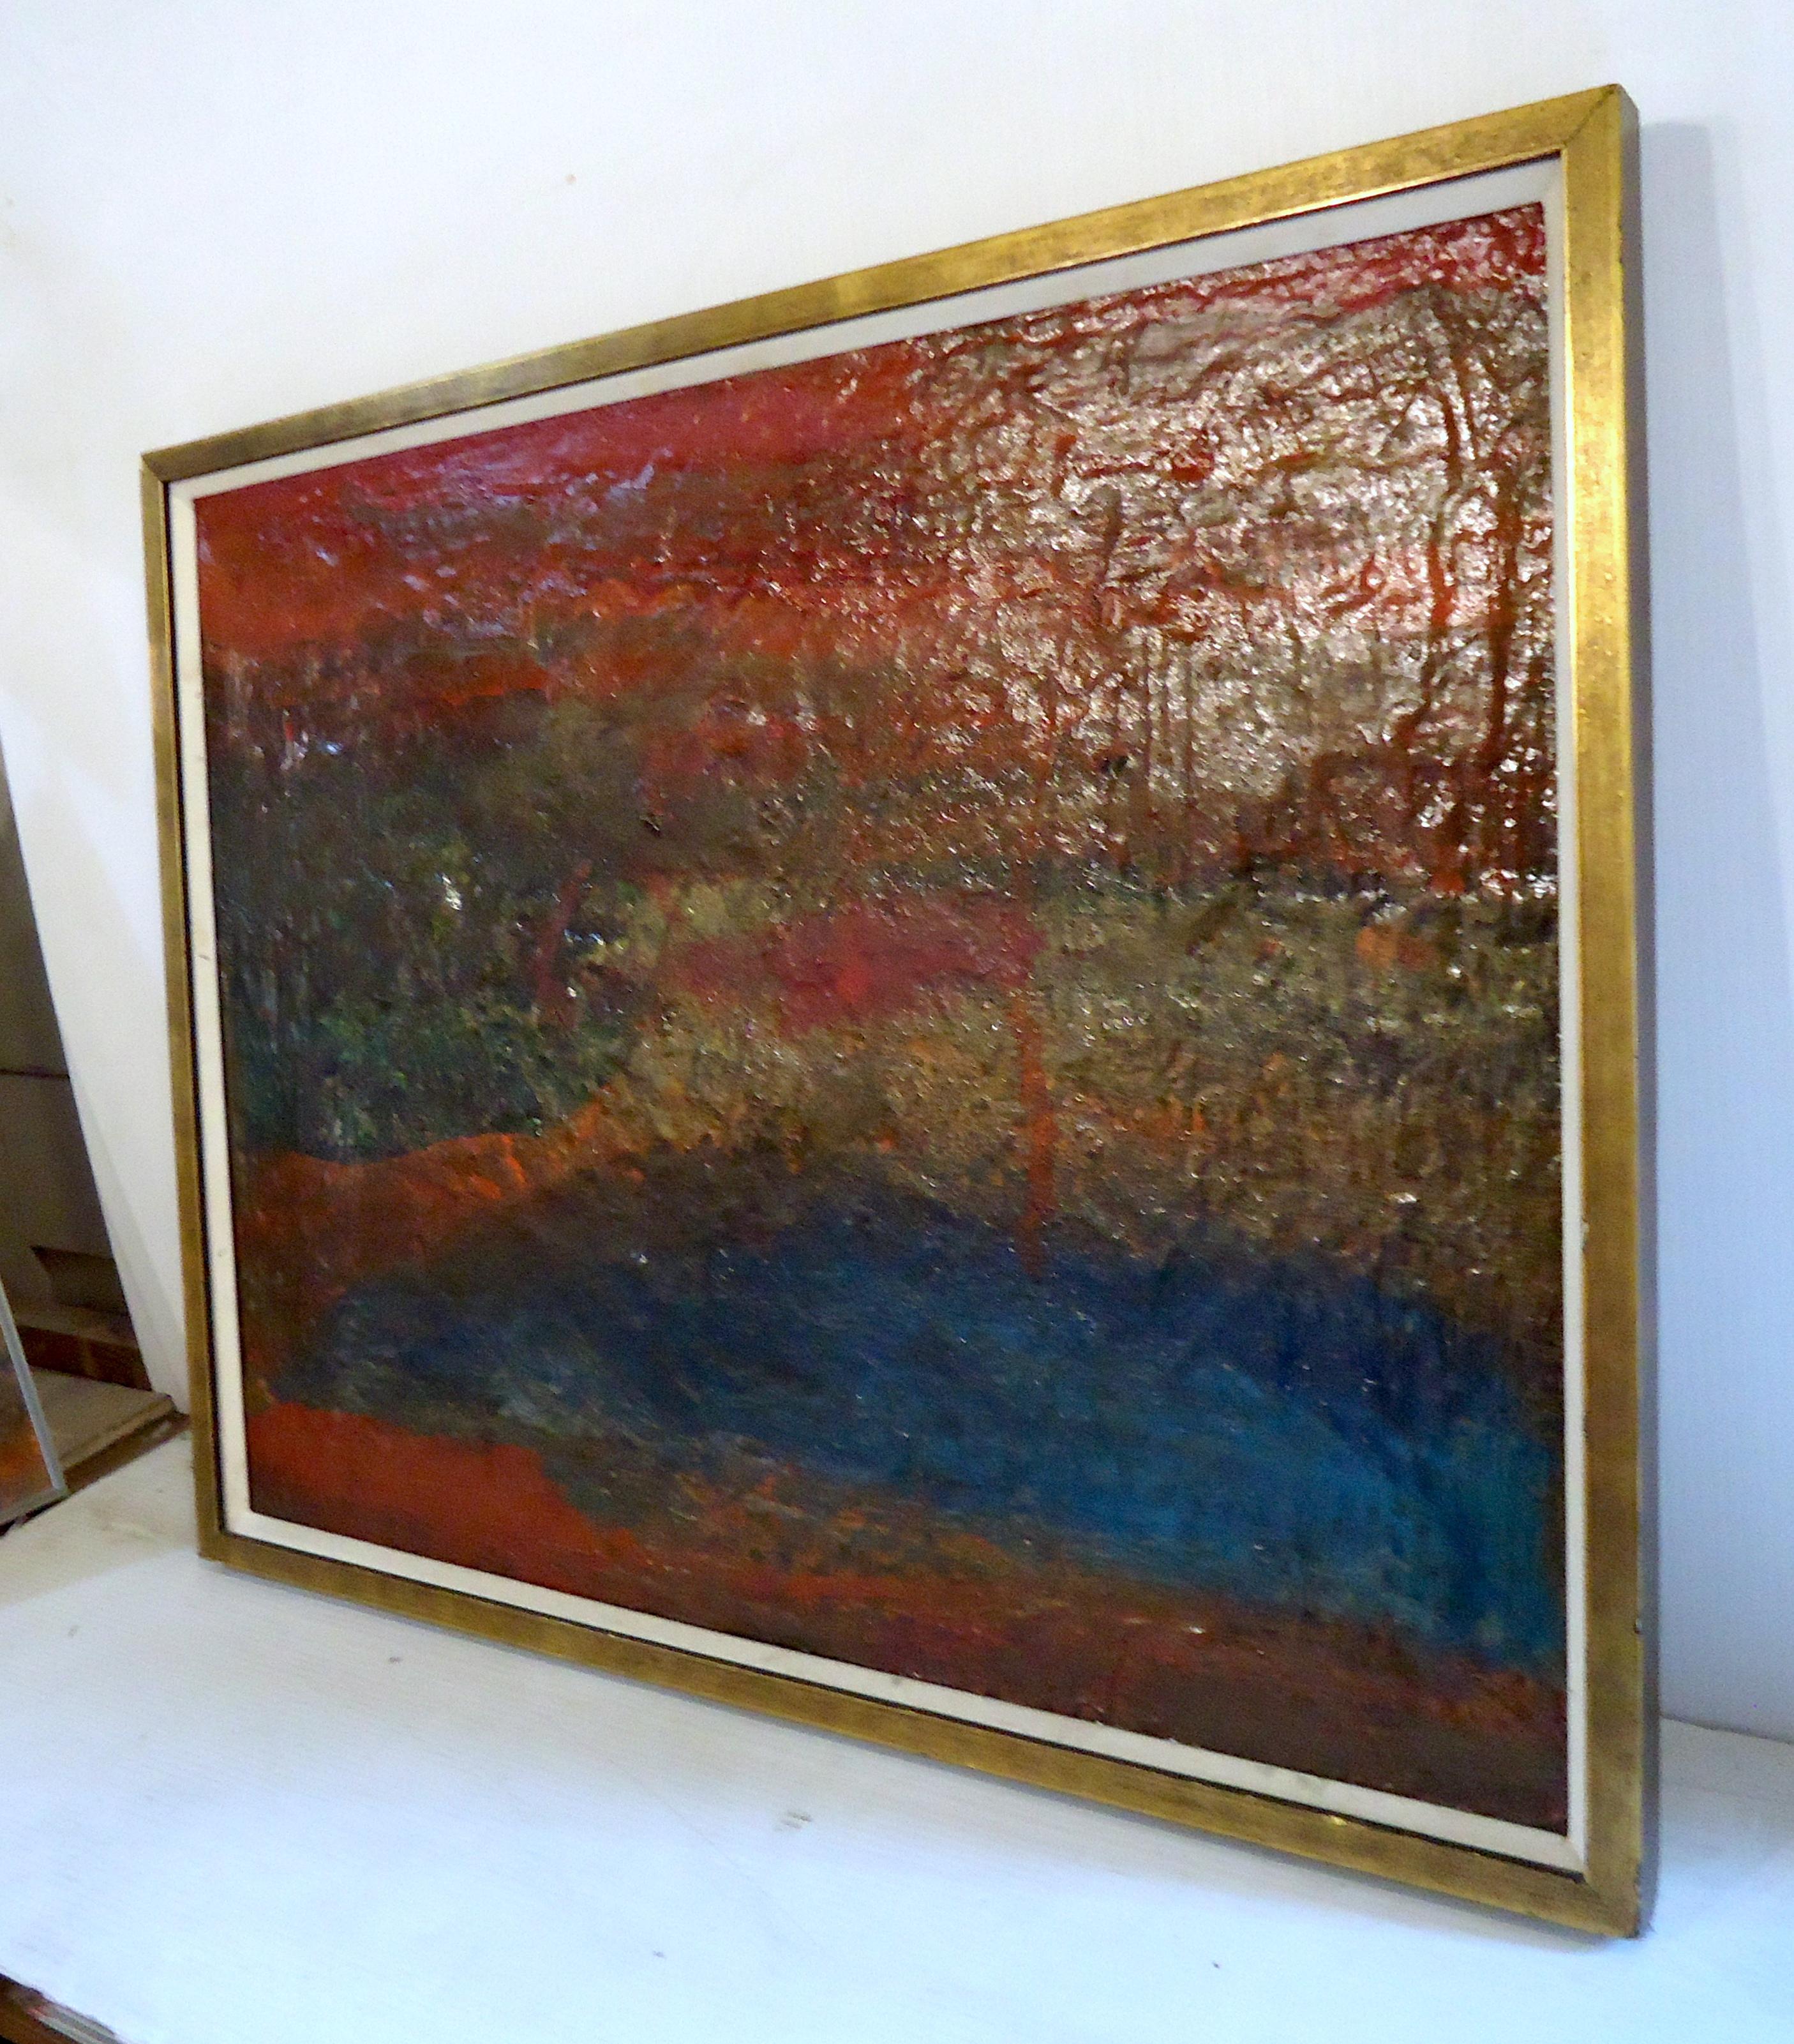 This frameless contemporary oil painting features a rich color palette and is well matted in a quality frame.
Please confirm item location (NY or NJ).